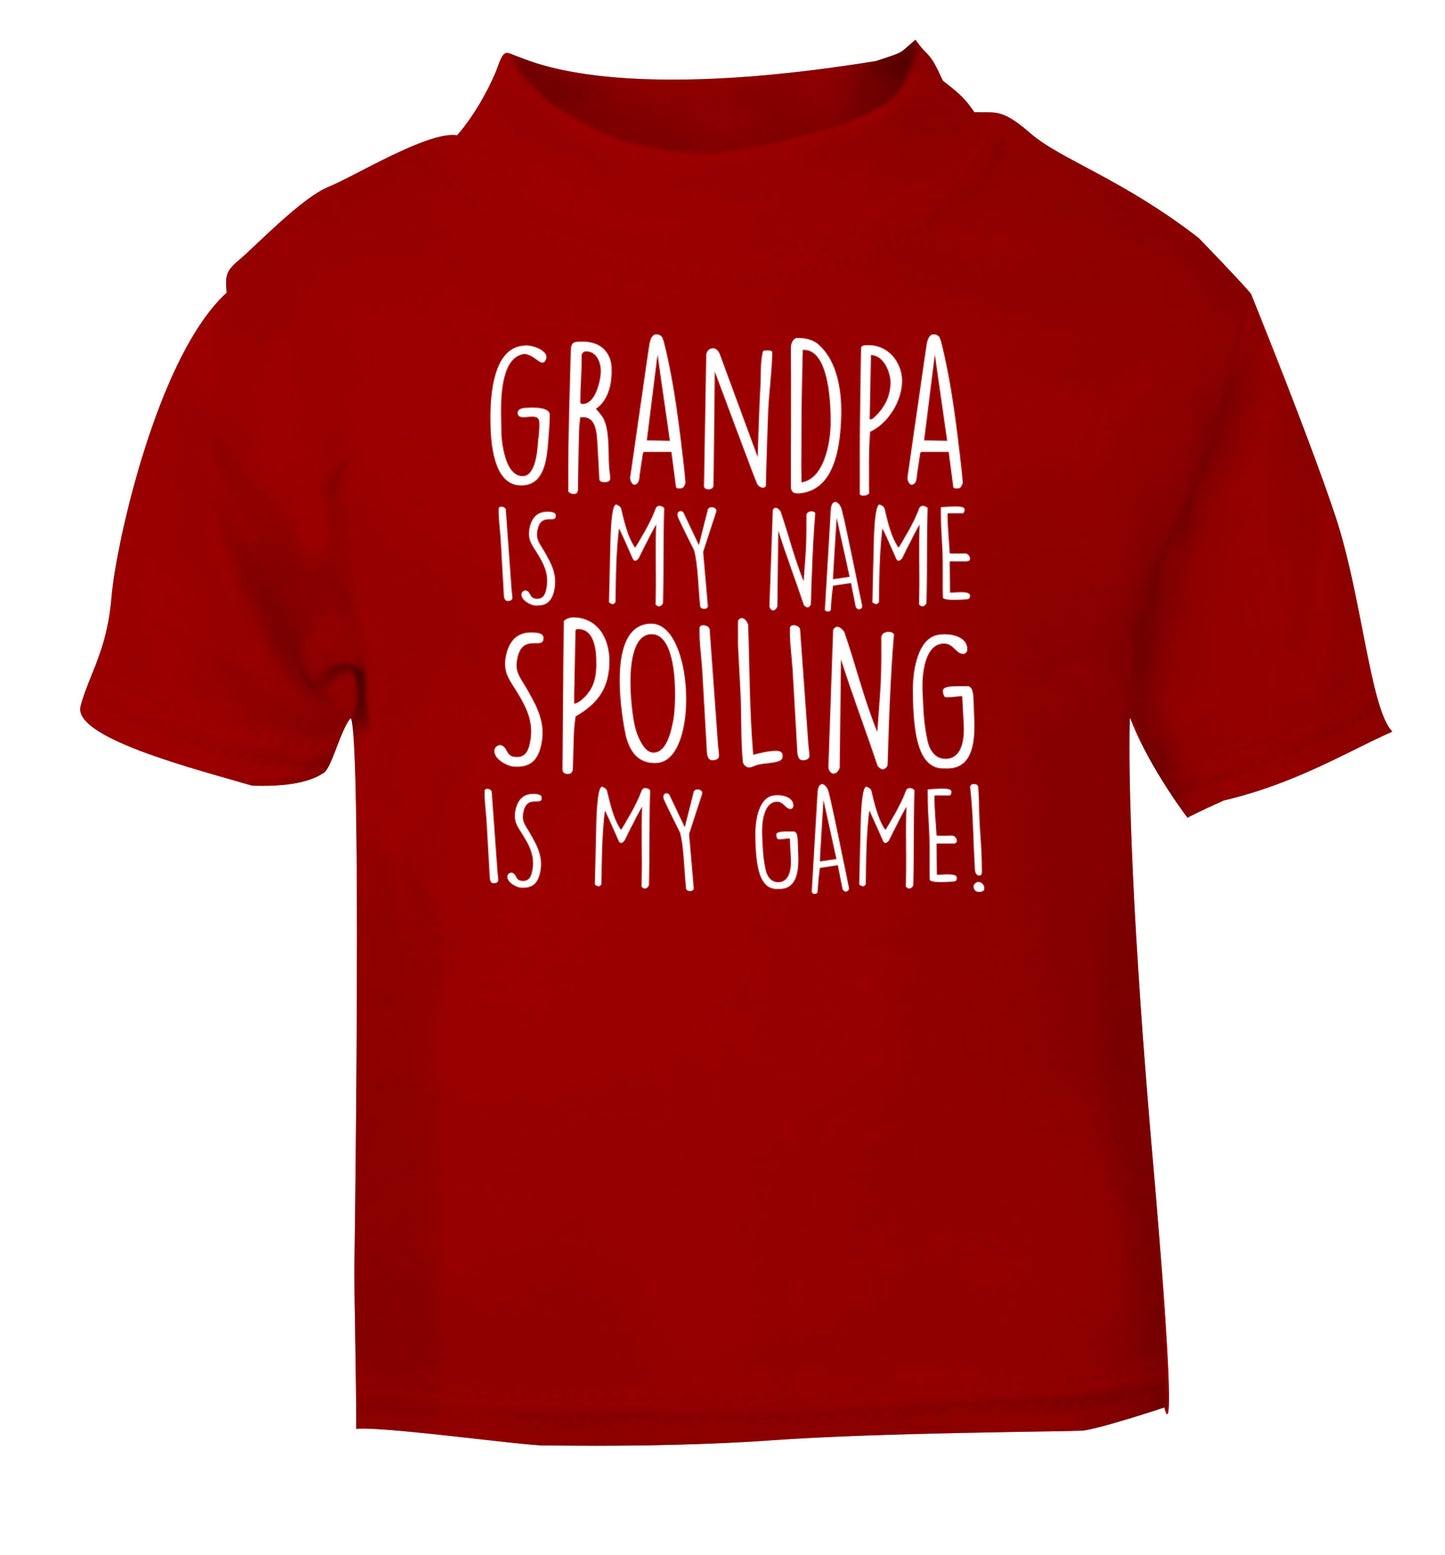 Grandpa is my name, spoiling is my game red Baby Toddler Tshirt 2 Years